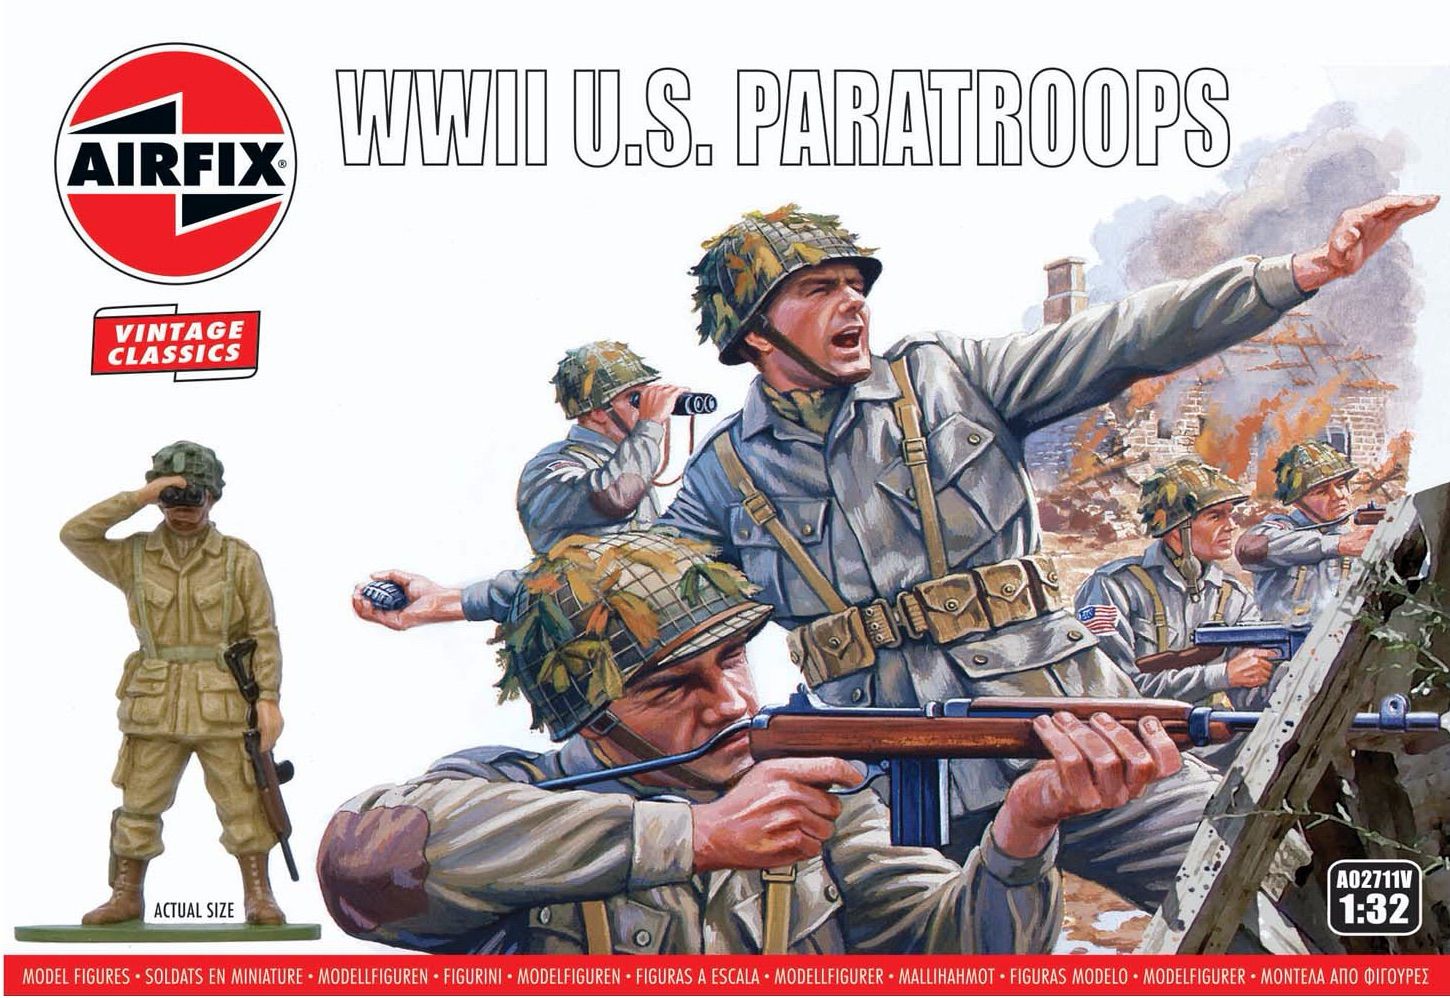 Airfix WWII US Paratroops (1:32) - Loaded Dice Barry Vale of Glamorgan CF64 3HD